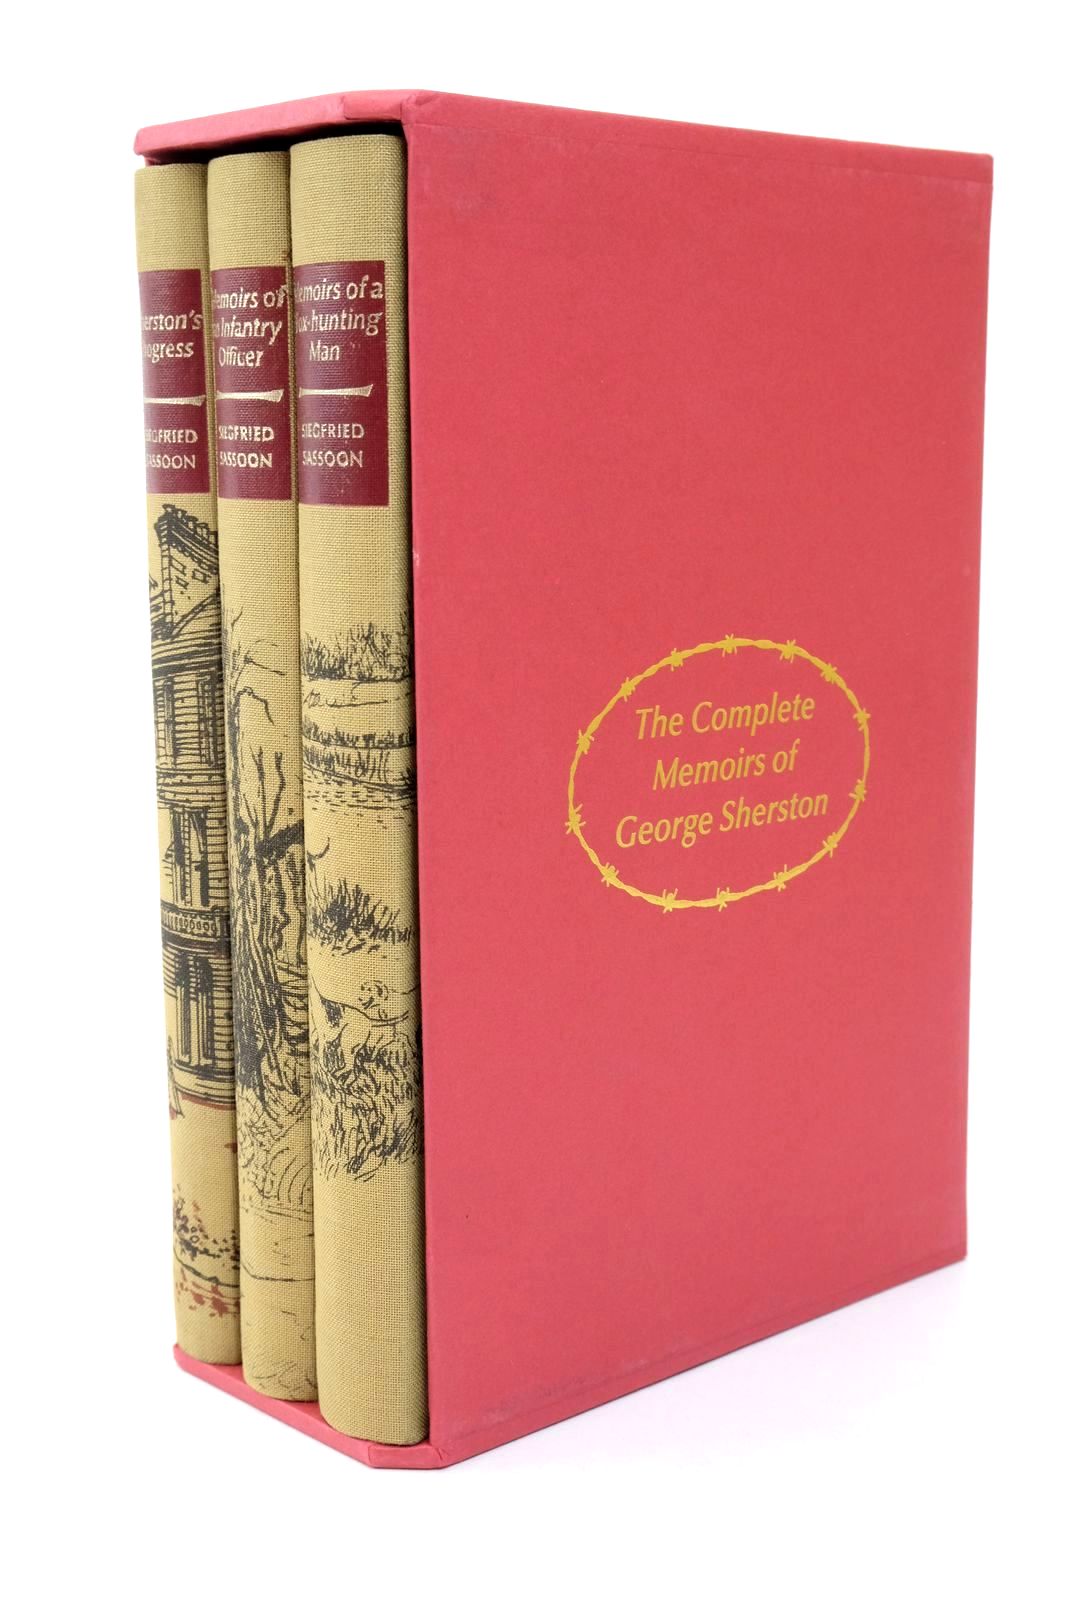 Photo of THE COMPLETE MEMOIRS OF GEORGE SHERSTON (3 VOLUMES) written by Sassoon, Siegfried illustrated by Lawrence, John published by Folio Society (STOCK CODE: 1322509)  for sale by Stella & Rose's Books